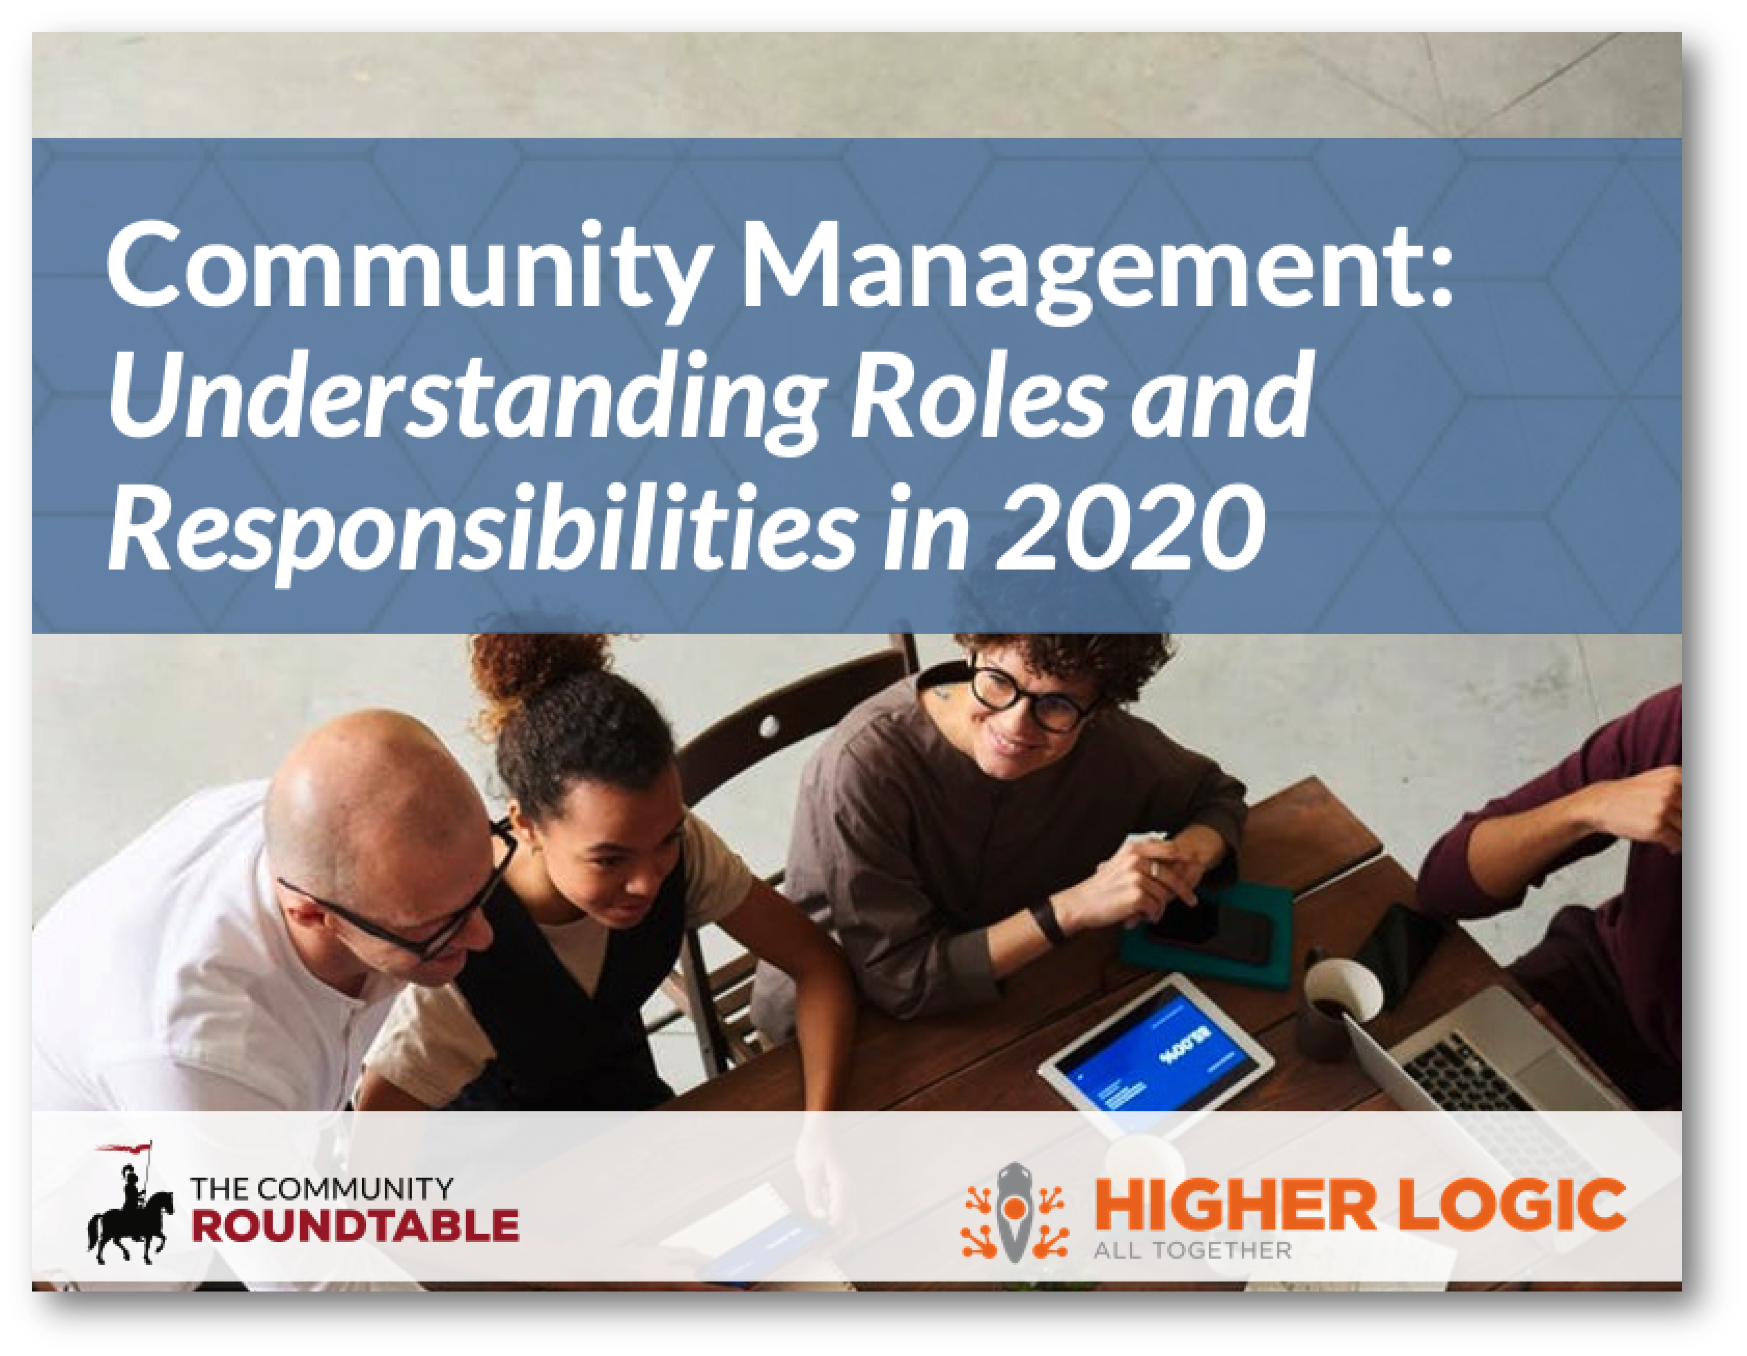 Community management roles and responsibilities